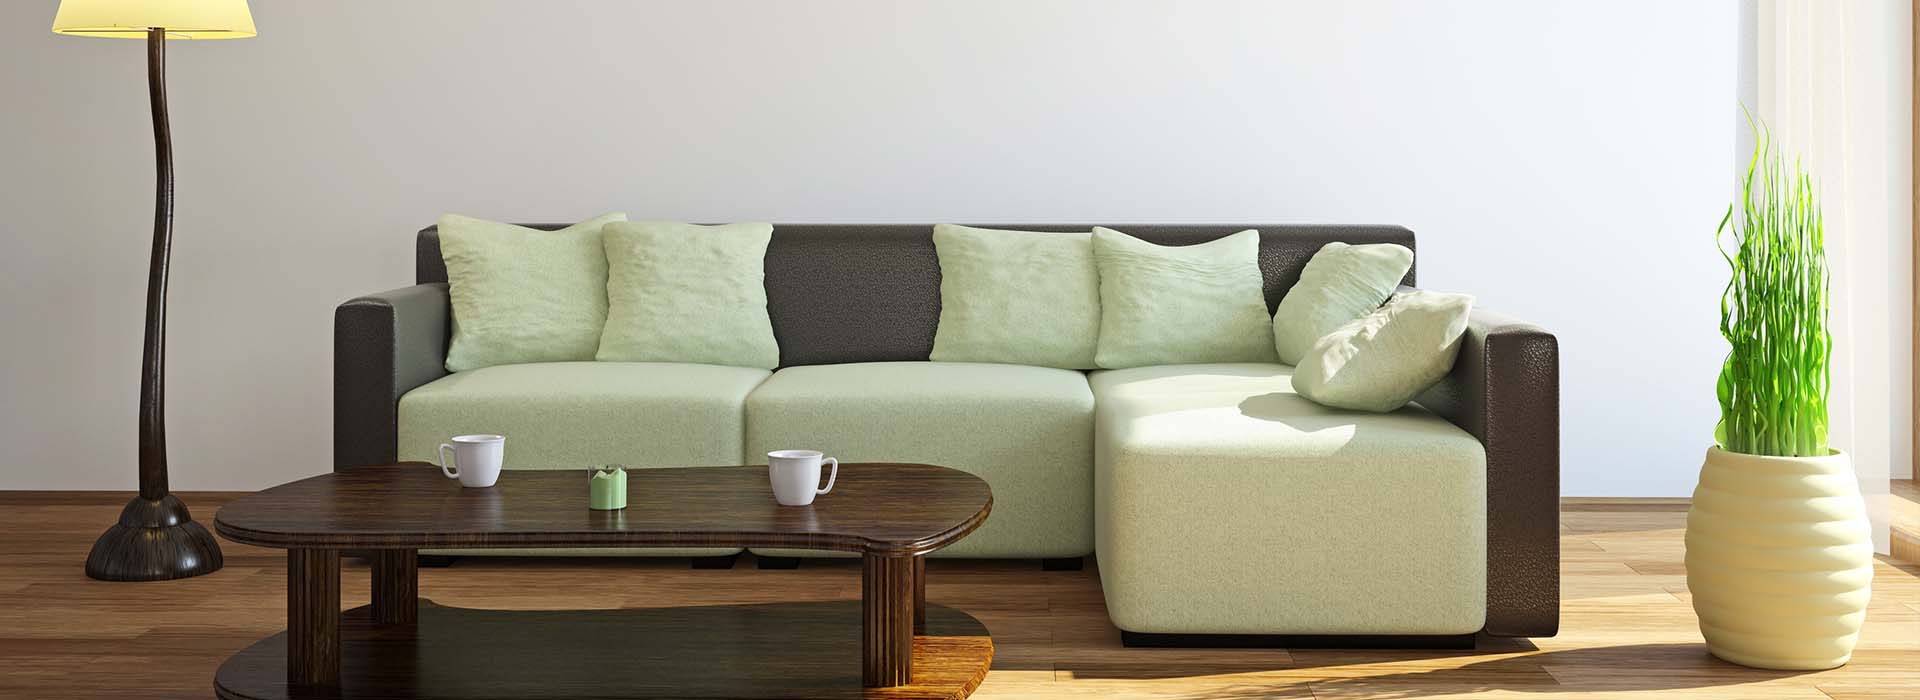 Living room with green/brown couch image